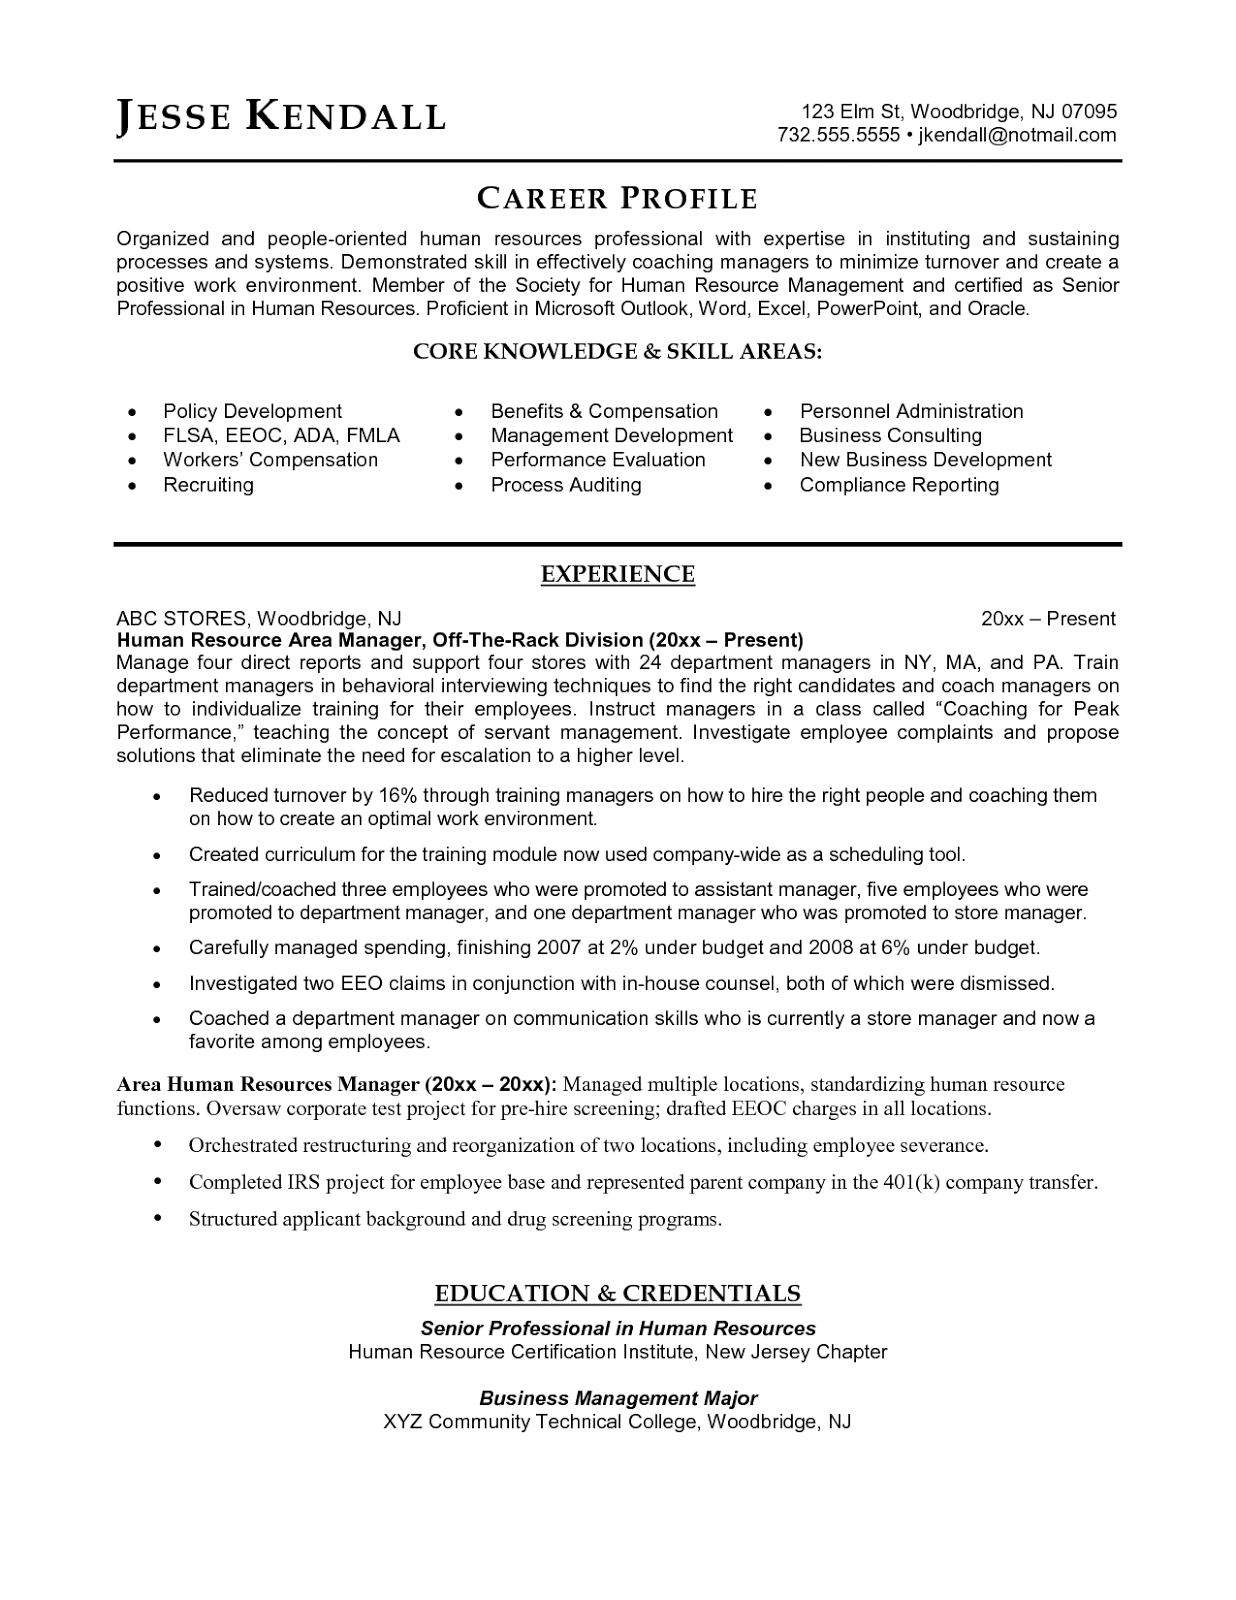 Sample cover letter for human resource job